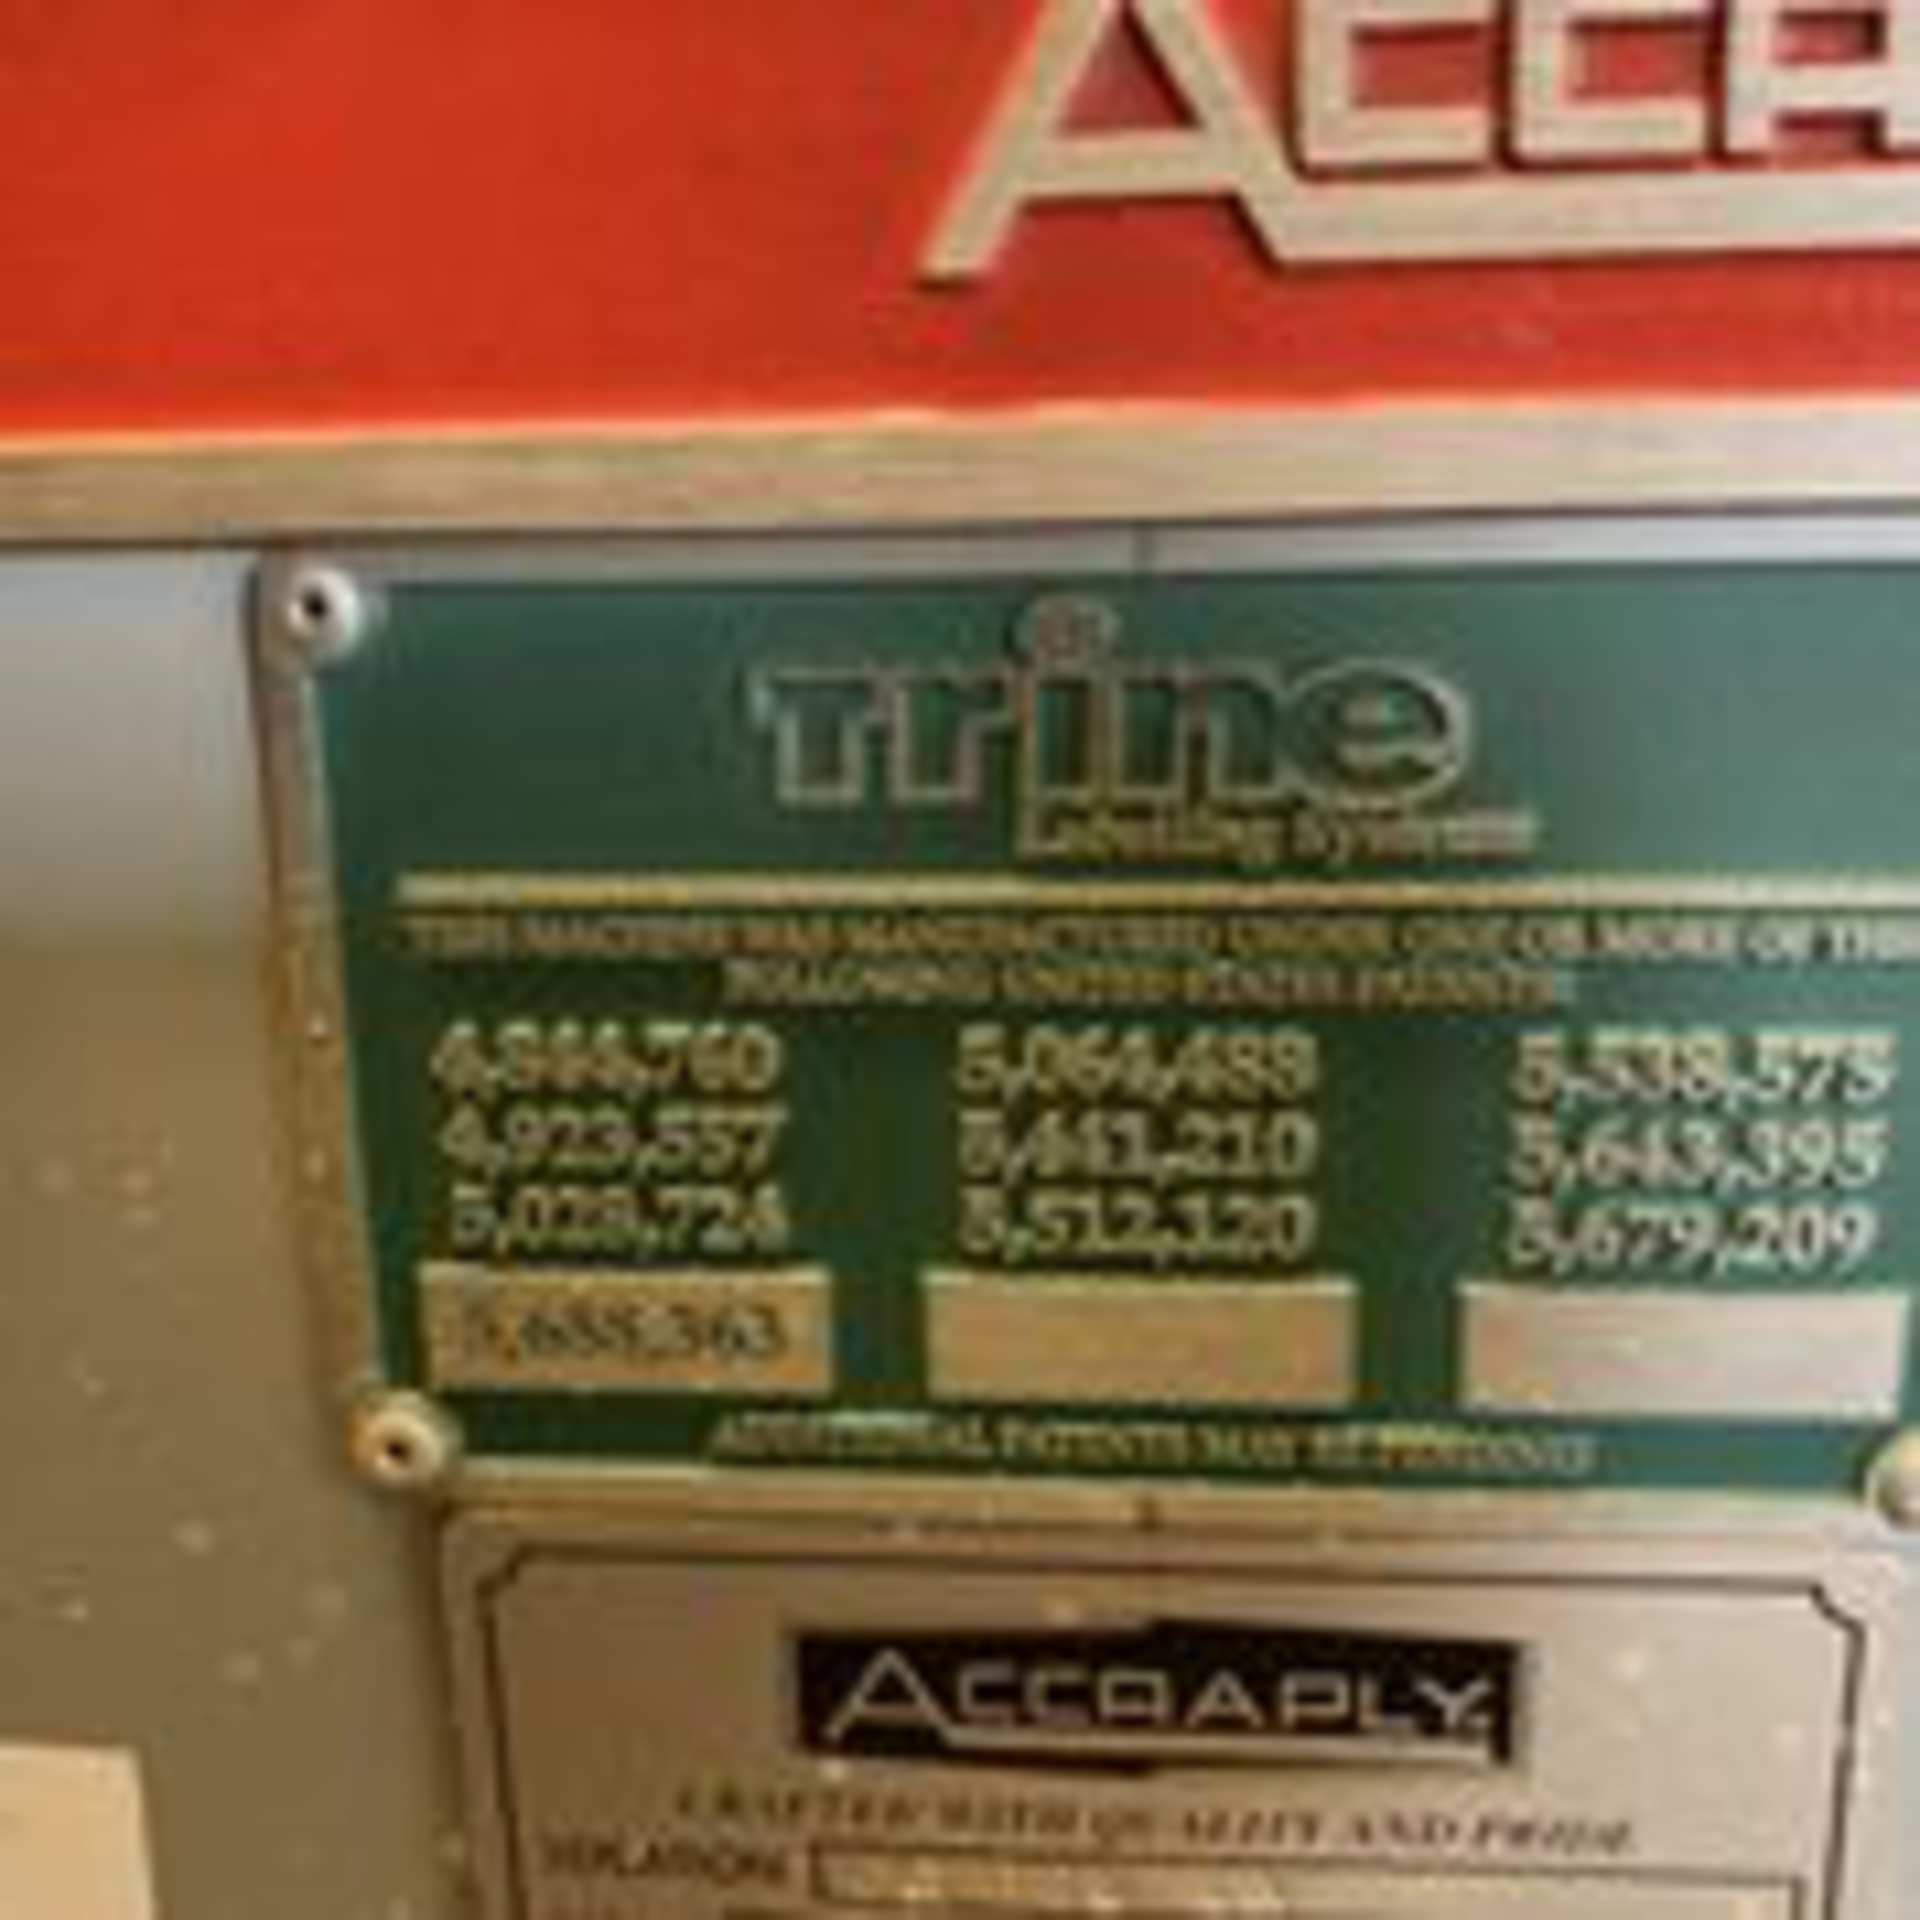 Accraply Trine Labler Model 4500GS S/N MSN05935 . LOADING FEE $300 - Image 12 of 13